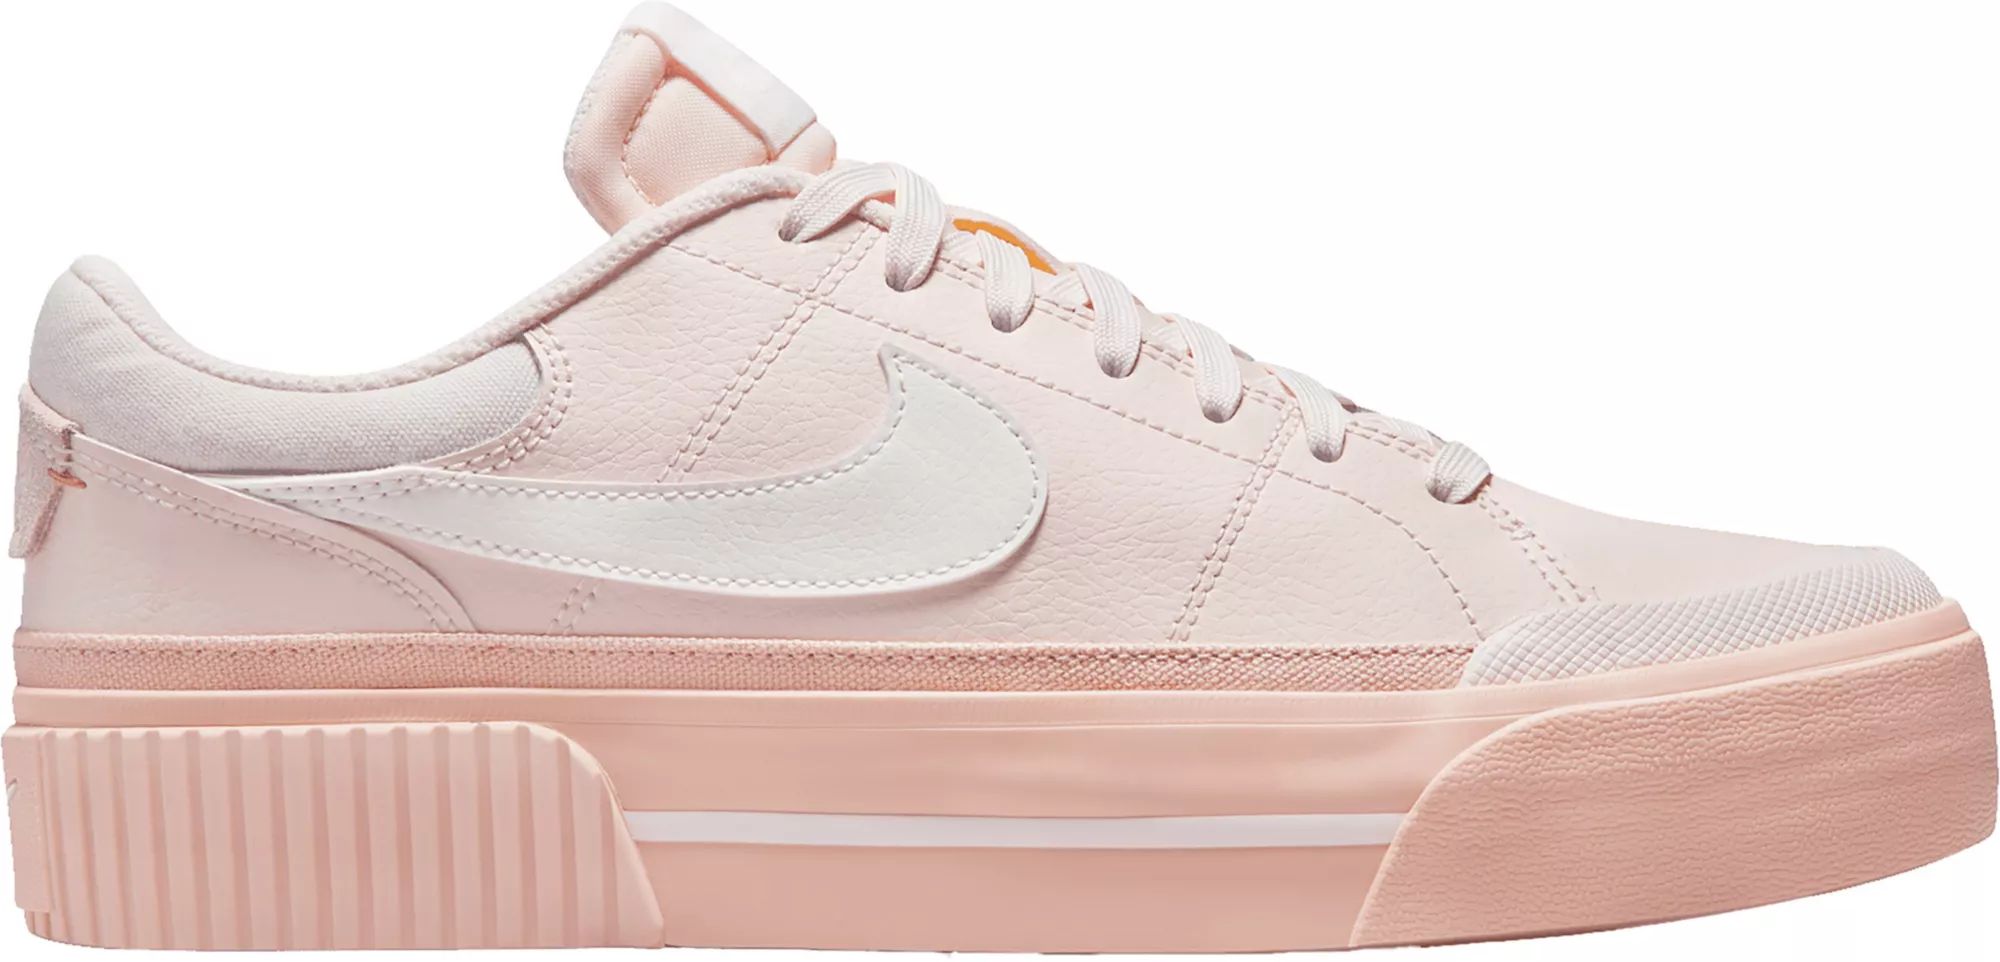 Nike Women's Court Legacy Lift Shoes, Size 8, Light Pink | Dick's Sporting Goods